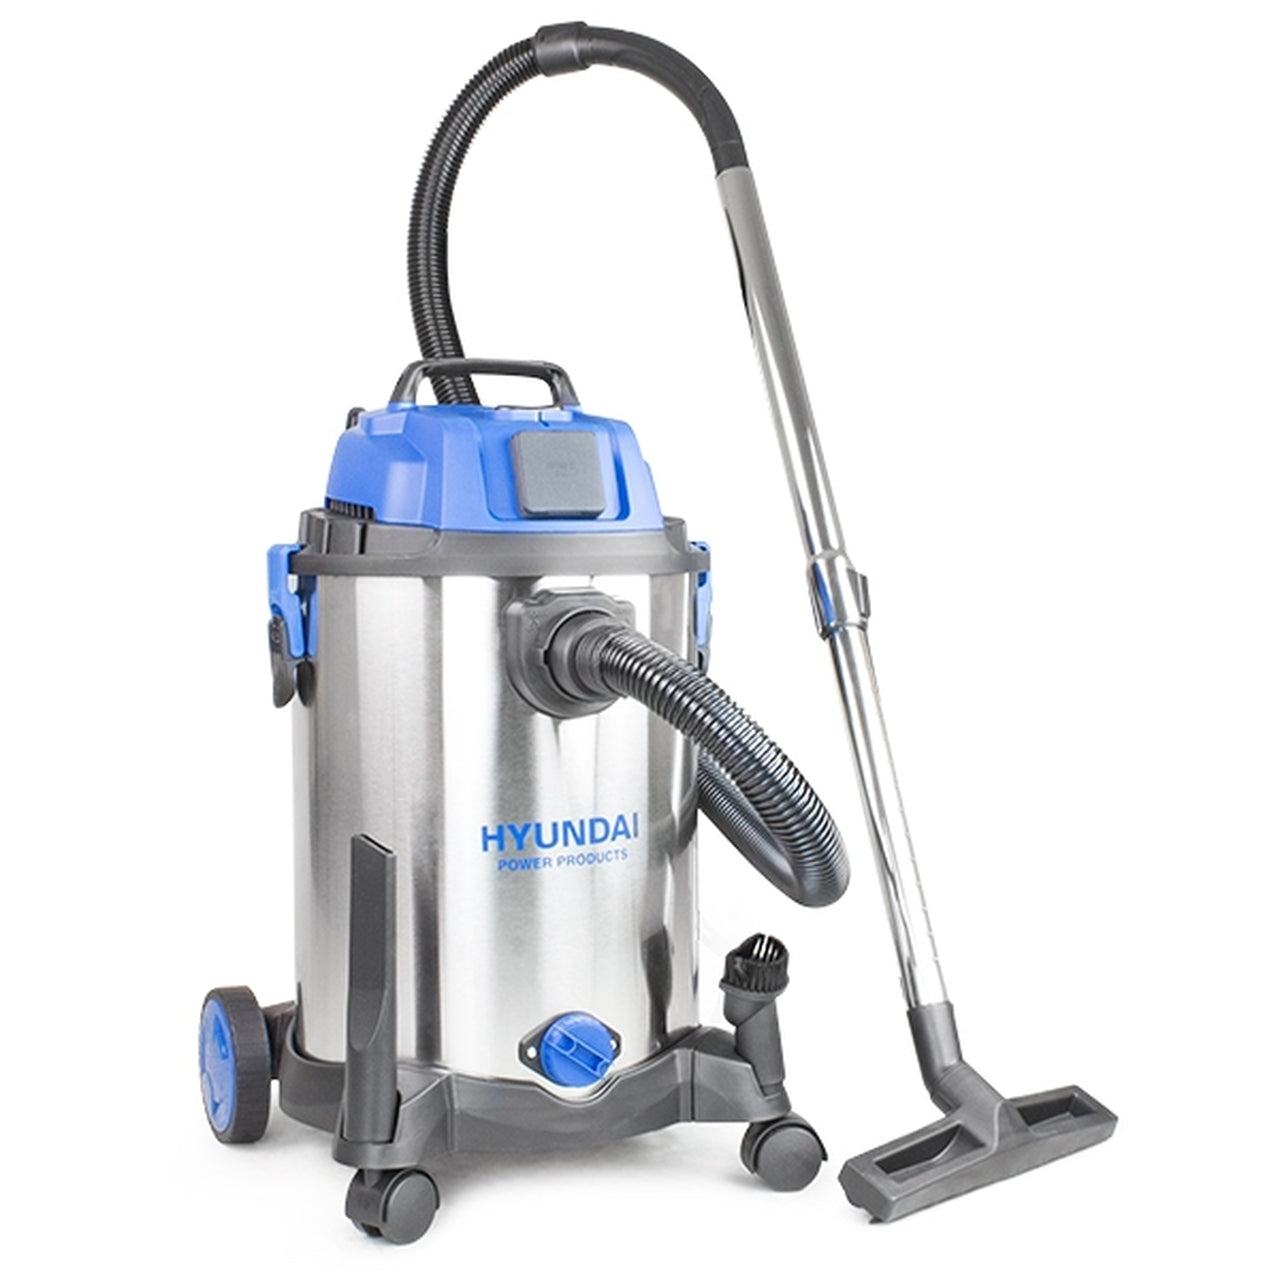 Hyundai HYVI3014 1400W 3-In-1 Wet and Dry HEPA Filtration Electric Vacuum Cleaner